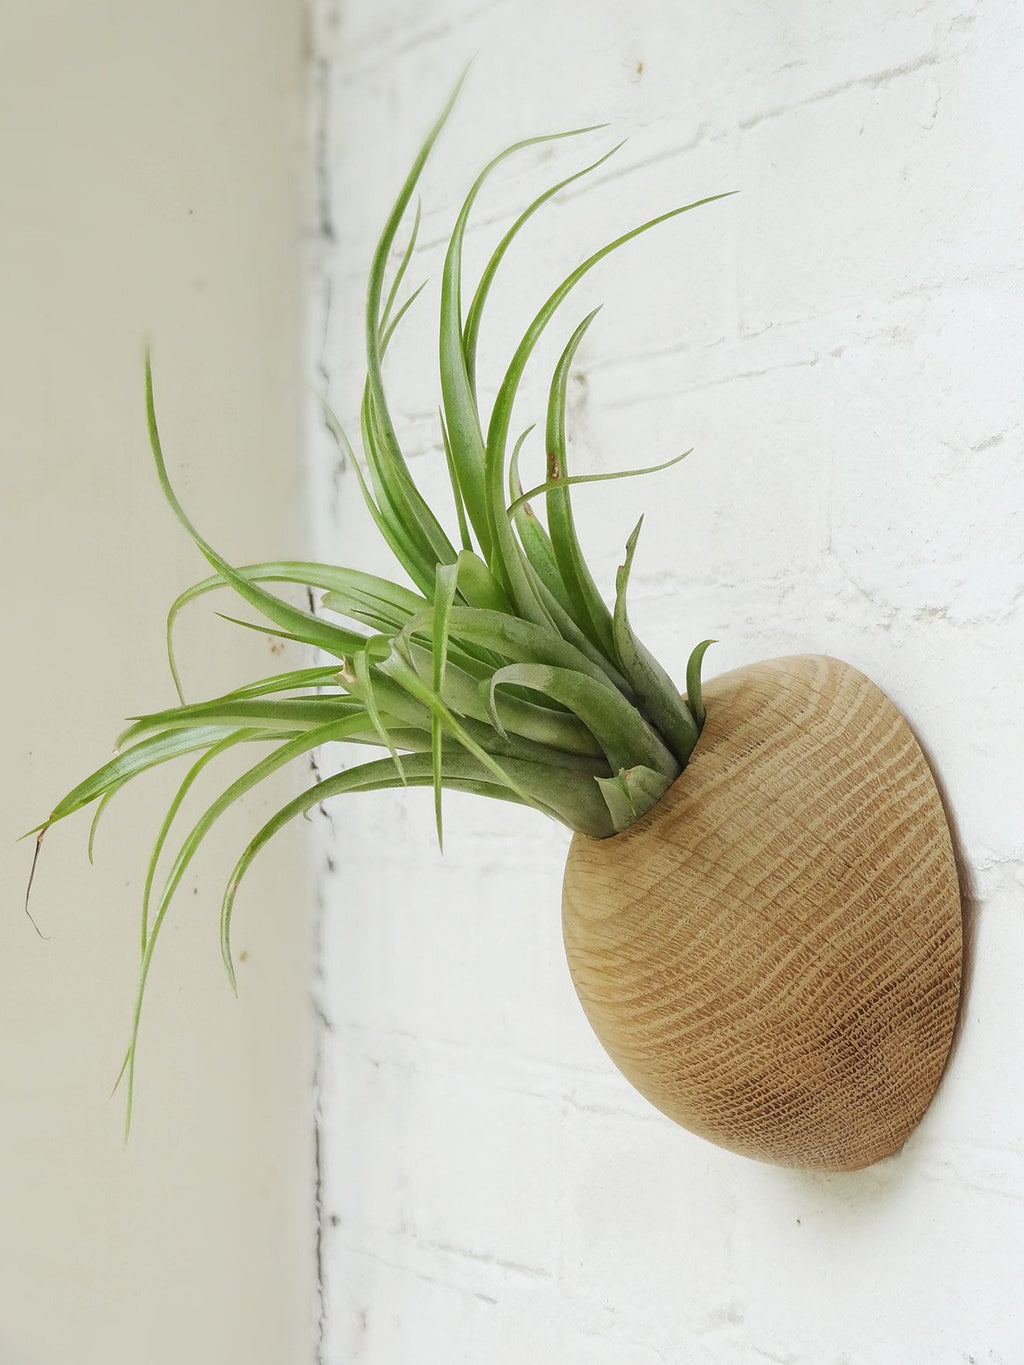 Picture of hemisphere wooden holder with Brachycaulos airplant. Side view